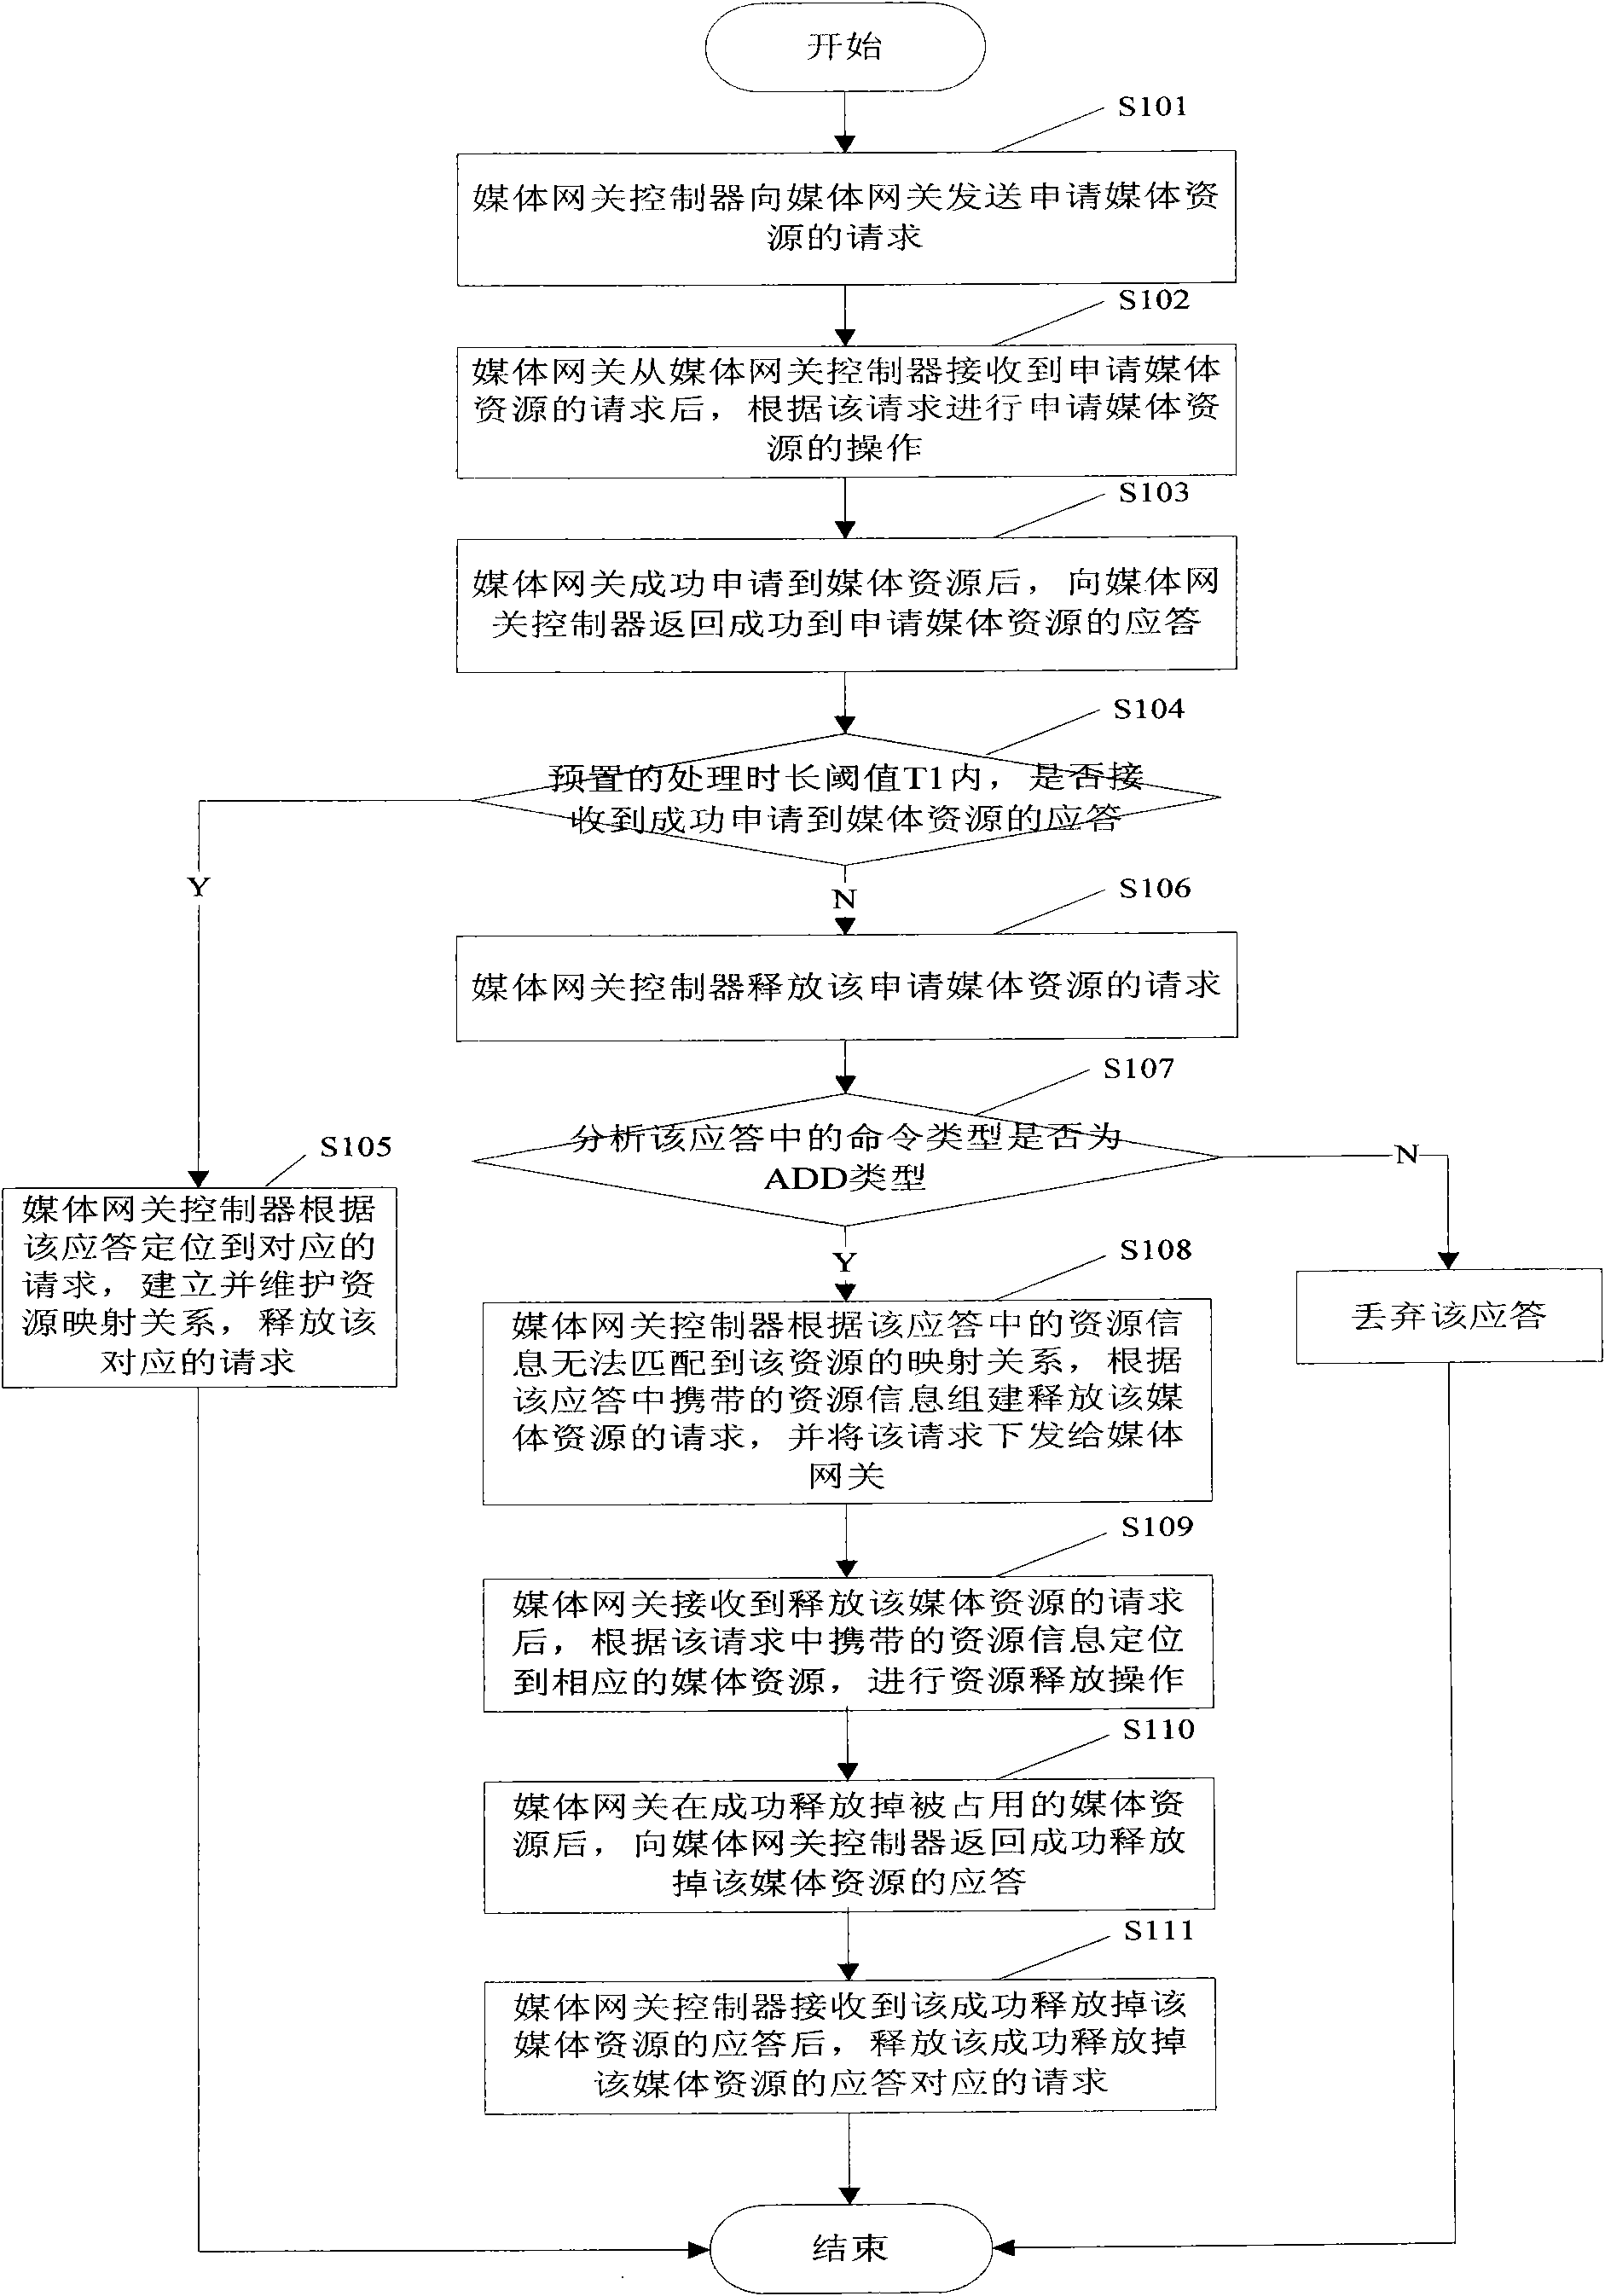 Method and system for reducing resource hang